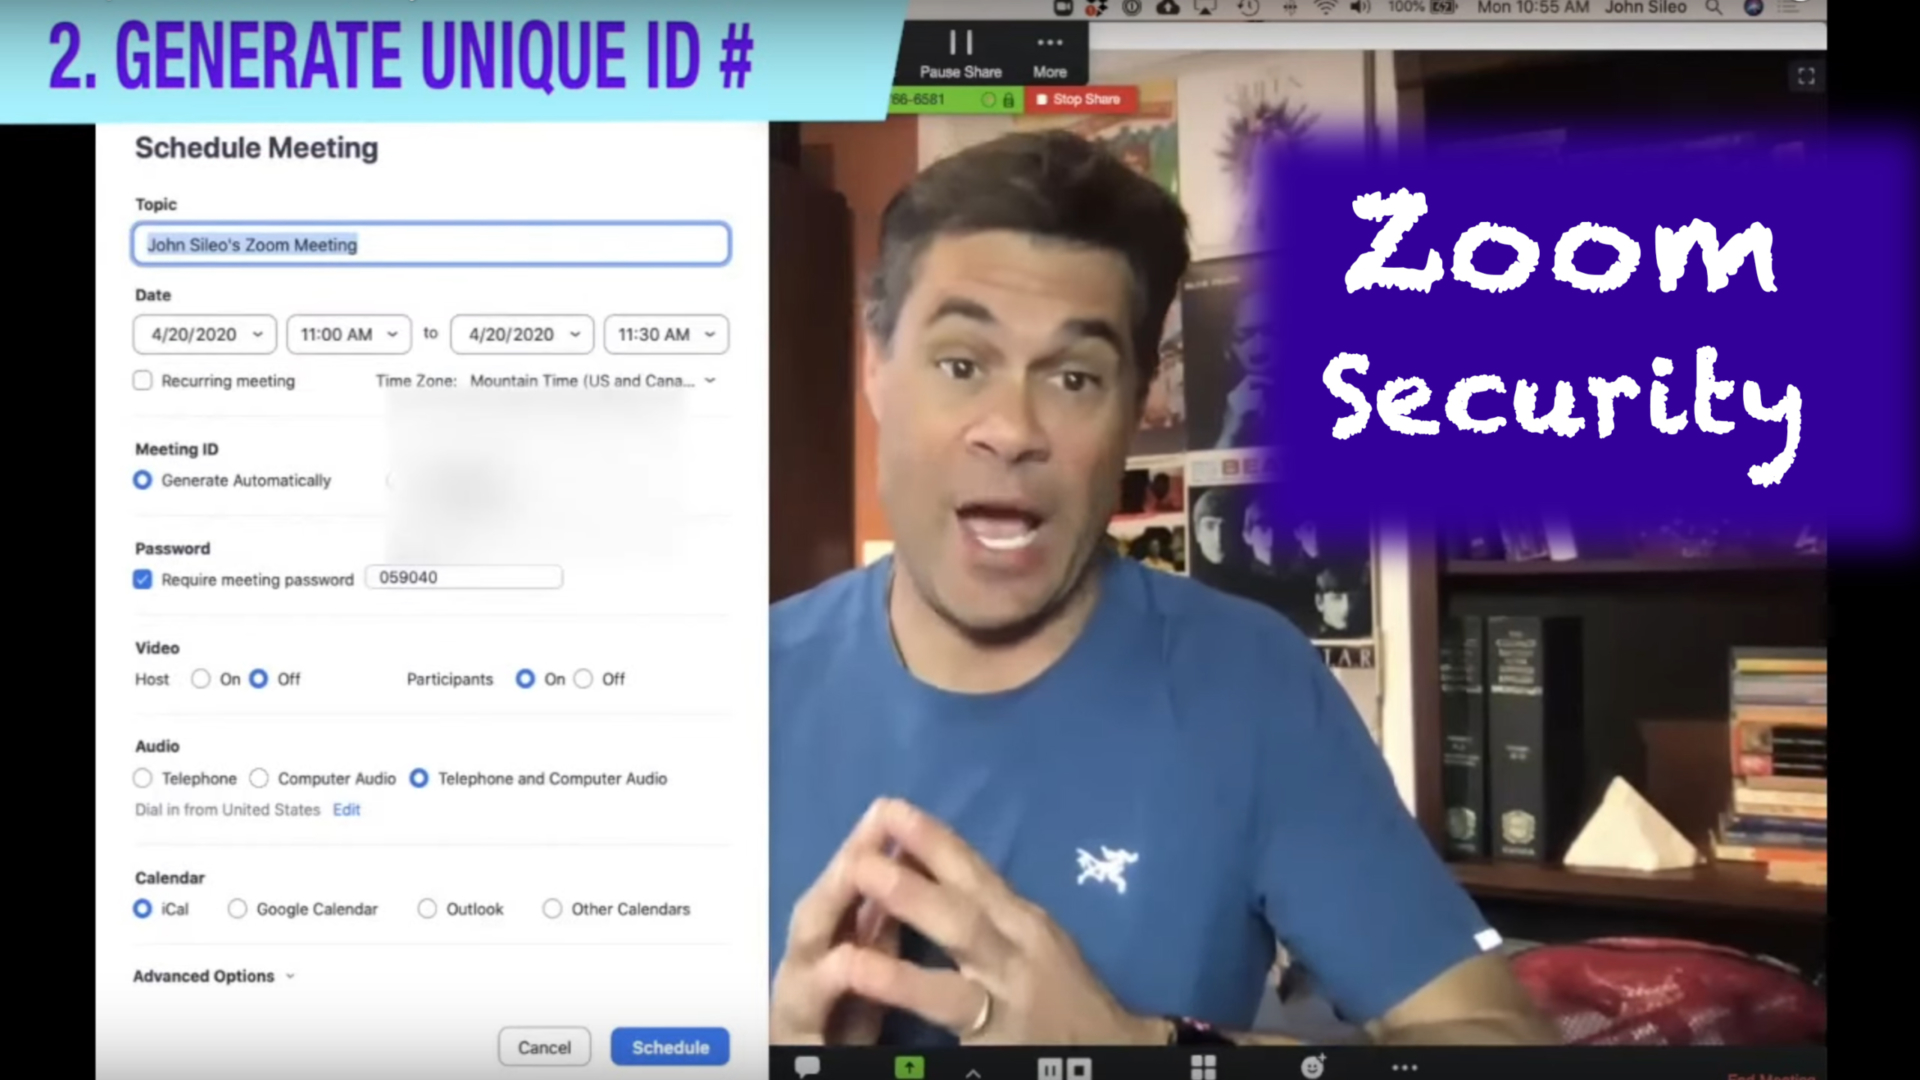 Zoom Security in 7 Steps (Video + Graphic)